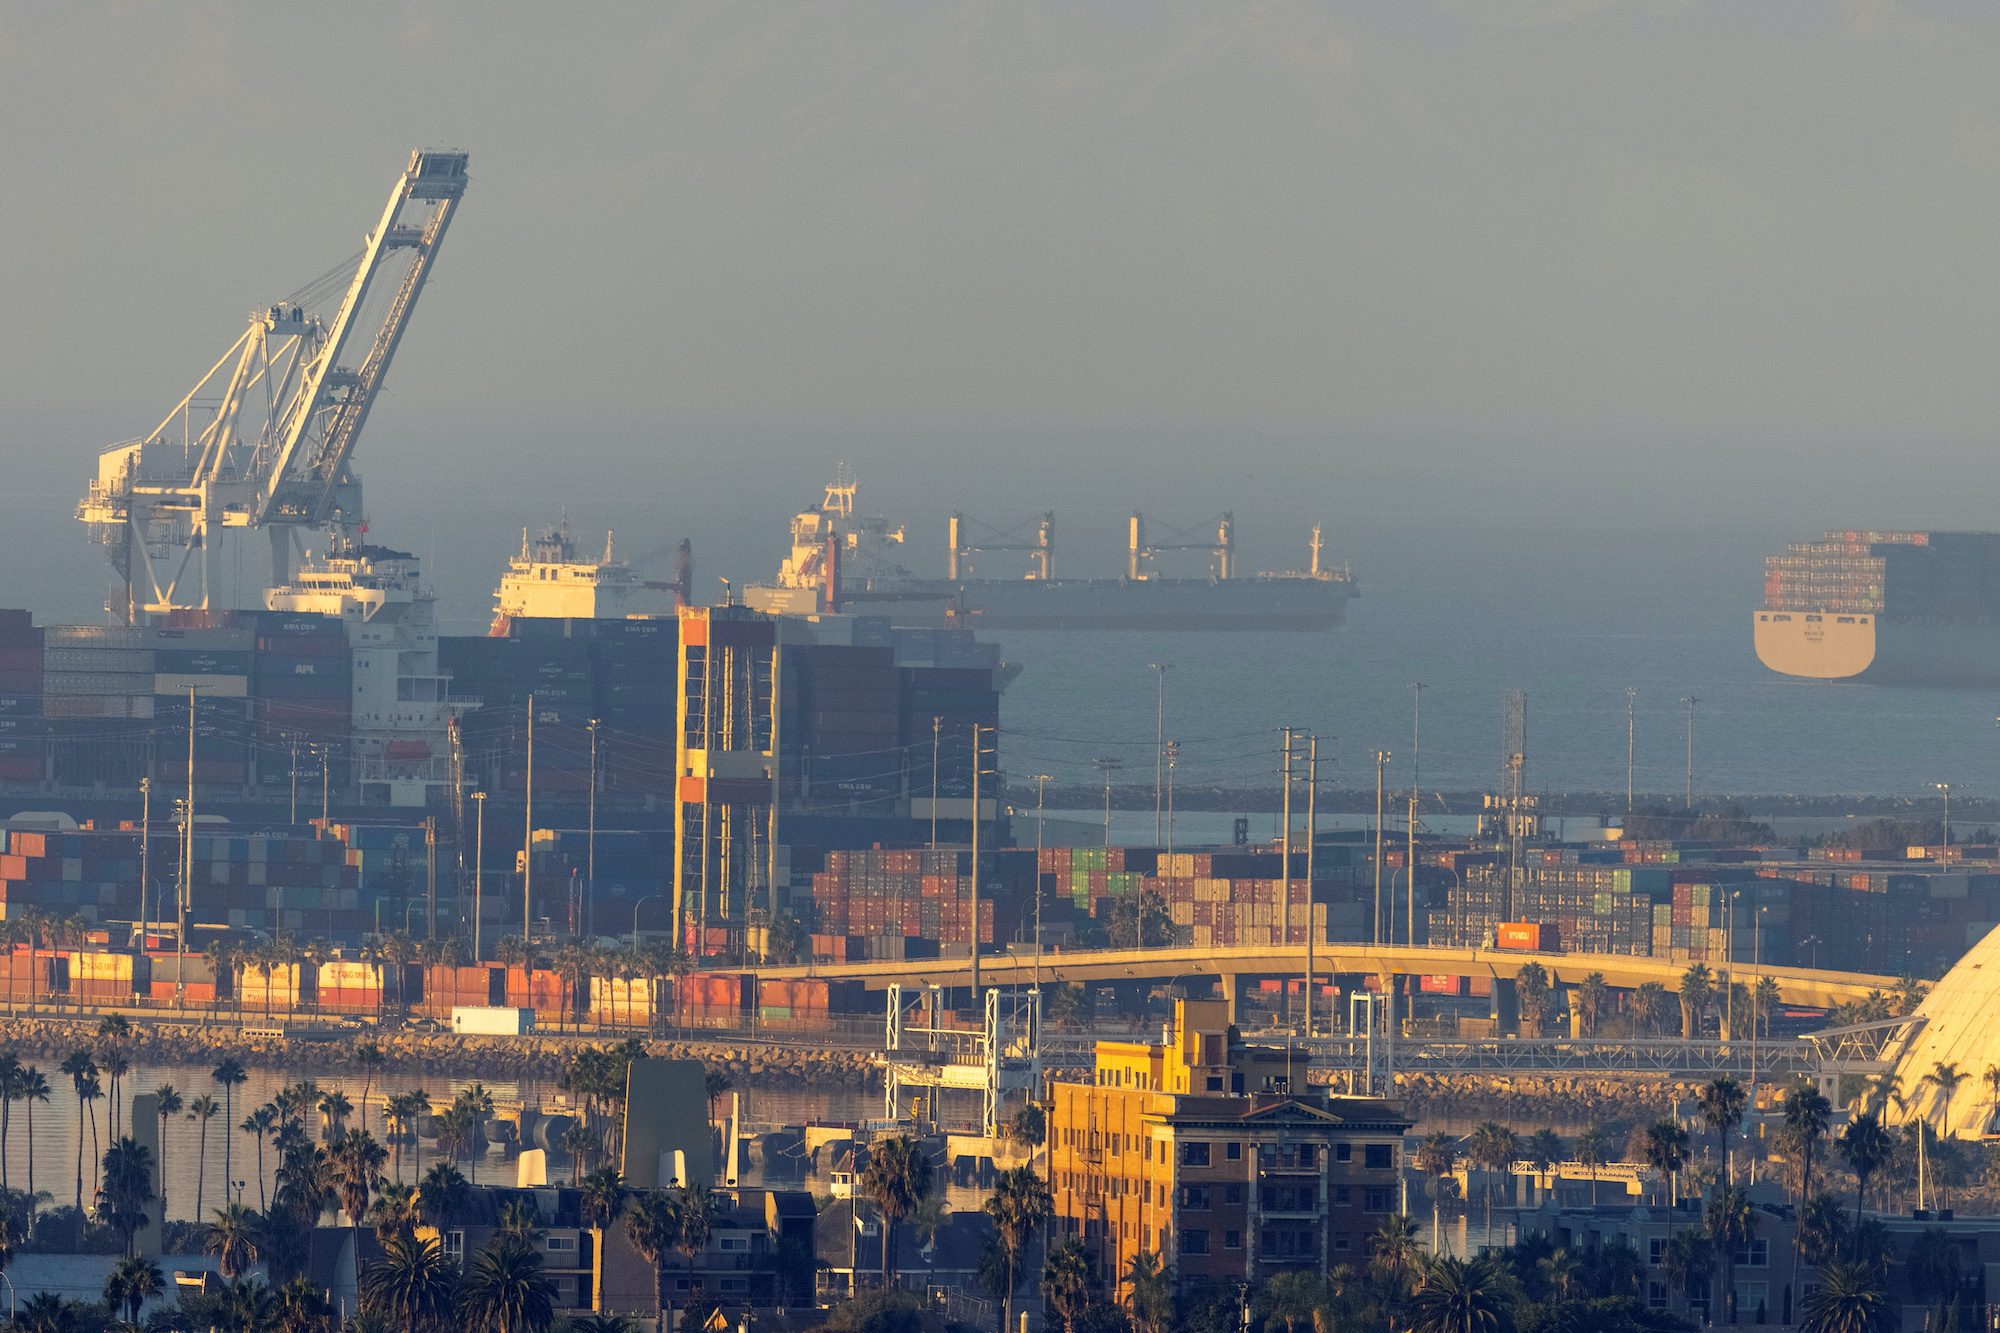 Record Volumes at Southern California Ports to Become ‘New Normal’ After Crisis